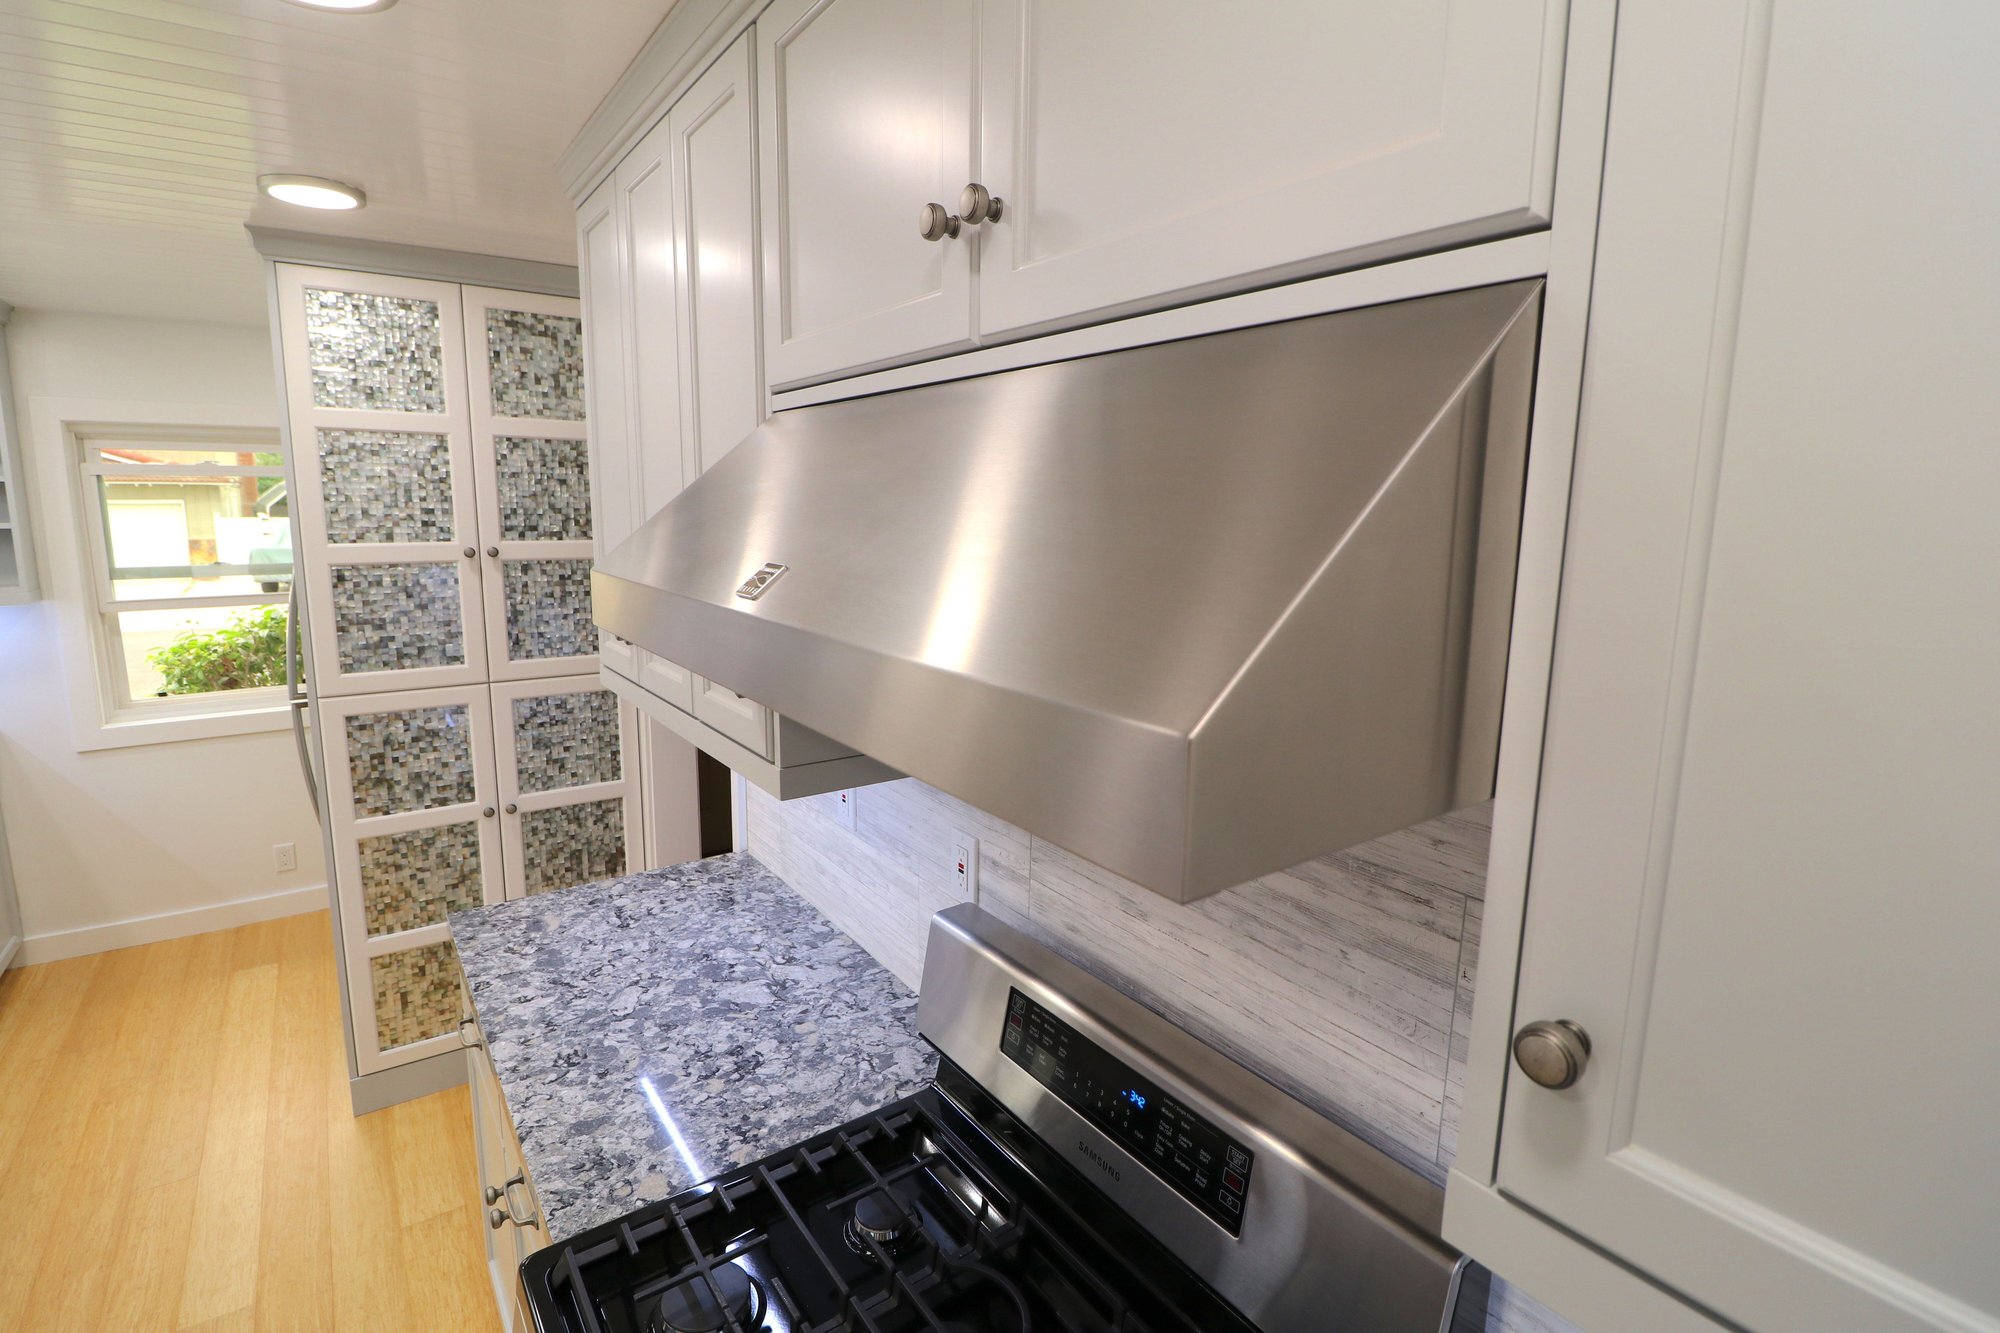 Torrance Kitchen Remodel - Contractor - Near Me